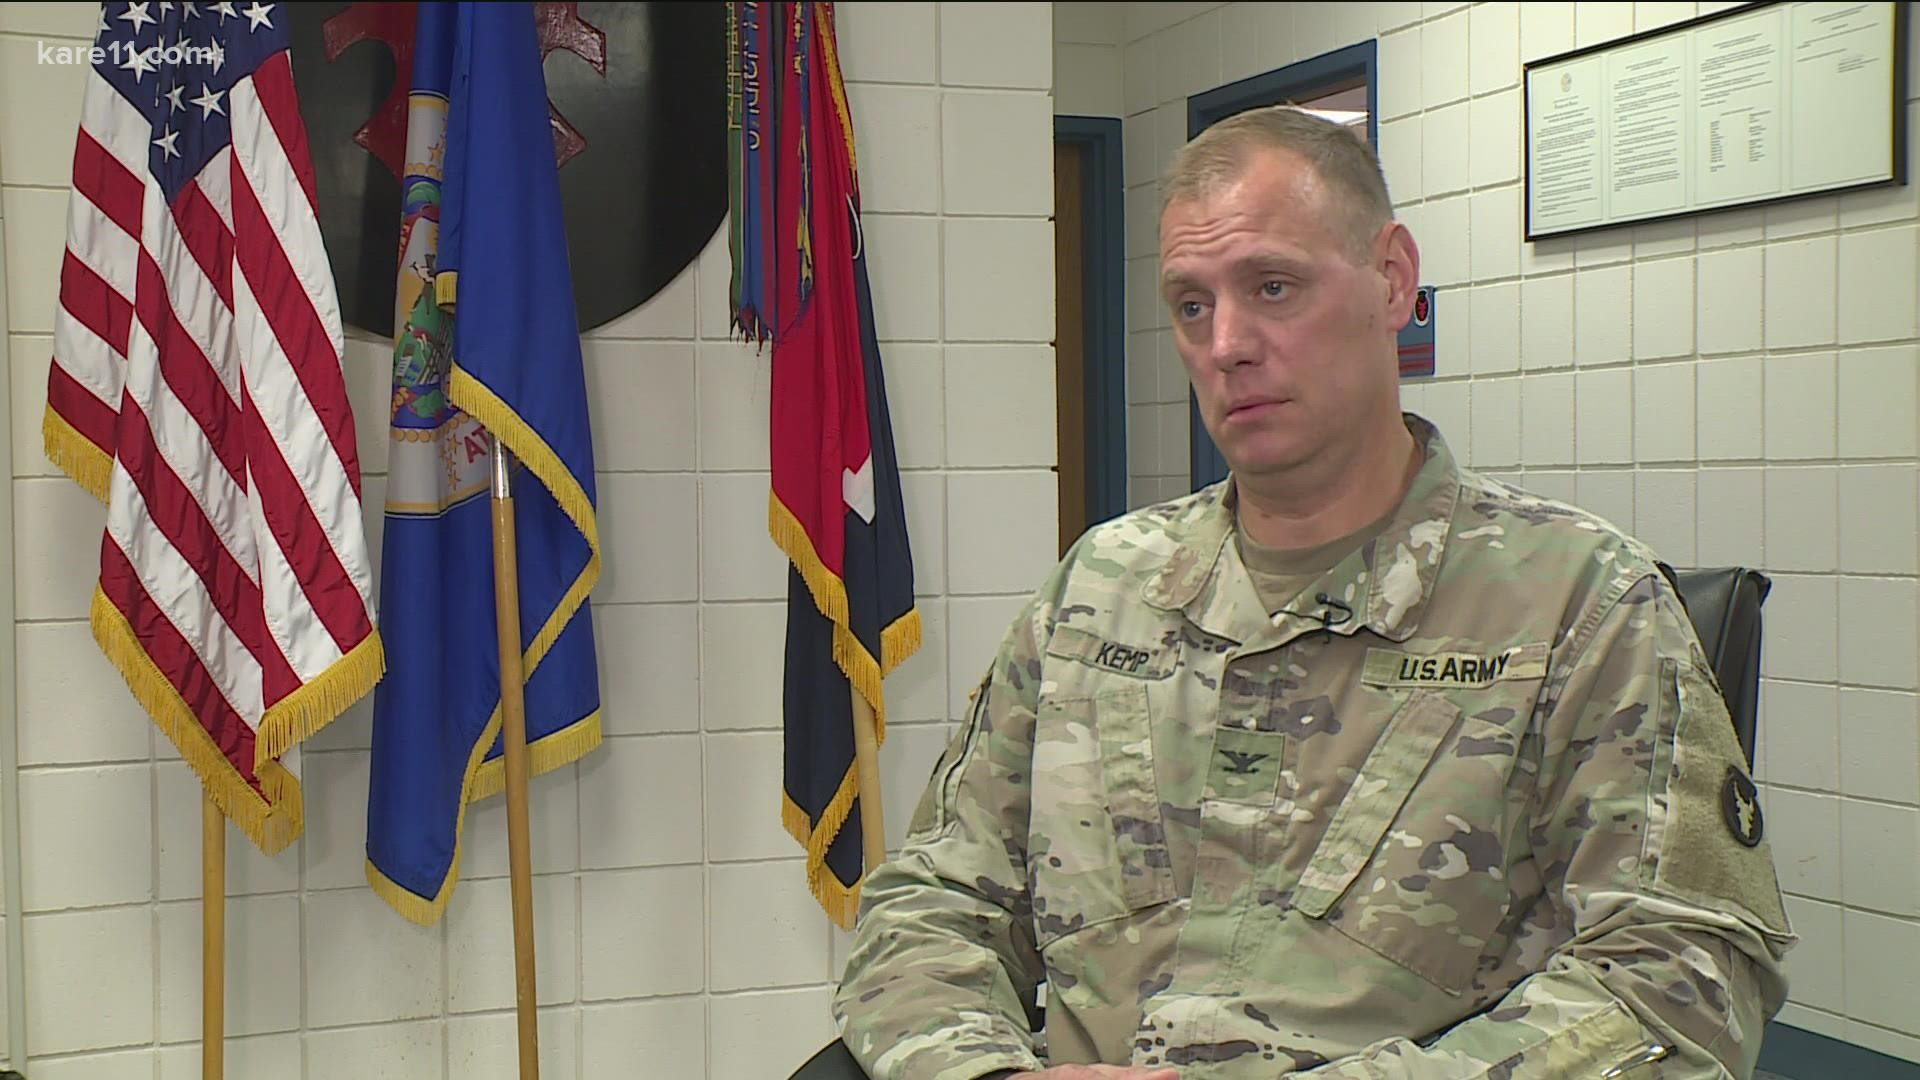 Col. Timothy Kemp says none of his soldiers were directly impacted by the explosions at the Kabul airport, but many encountered close calls and scary situations.